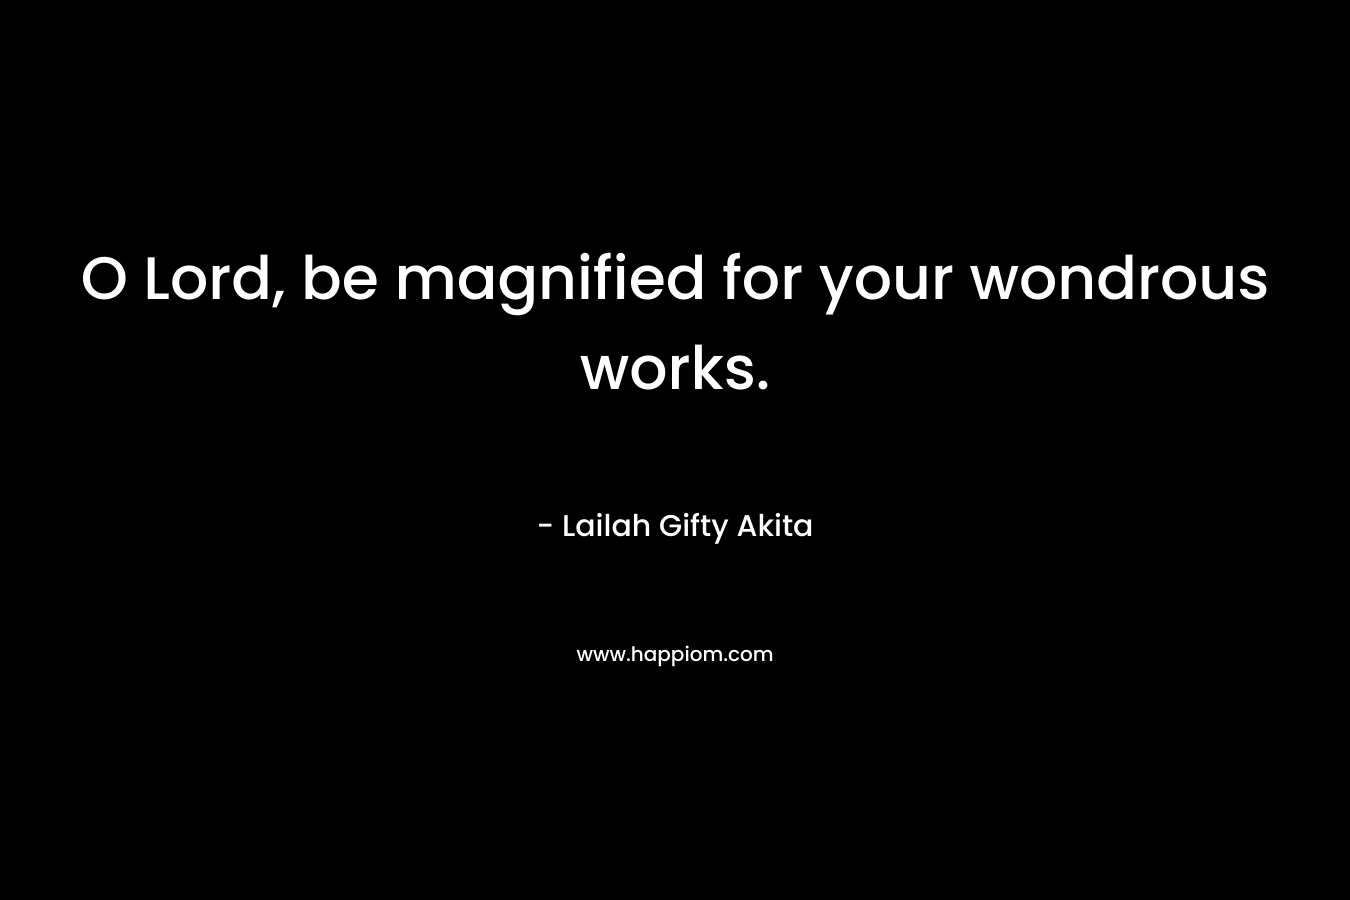 O Lord, be magnified for your wondrous works.